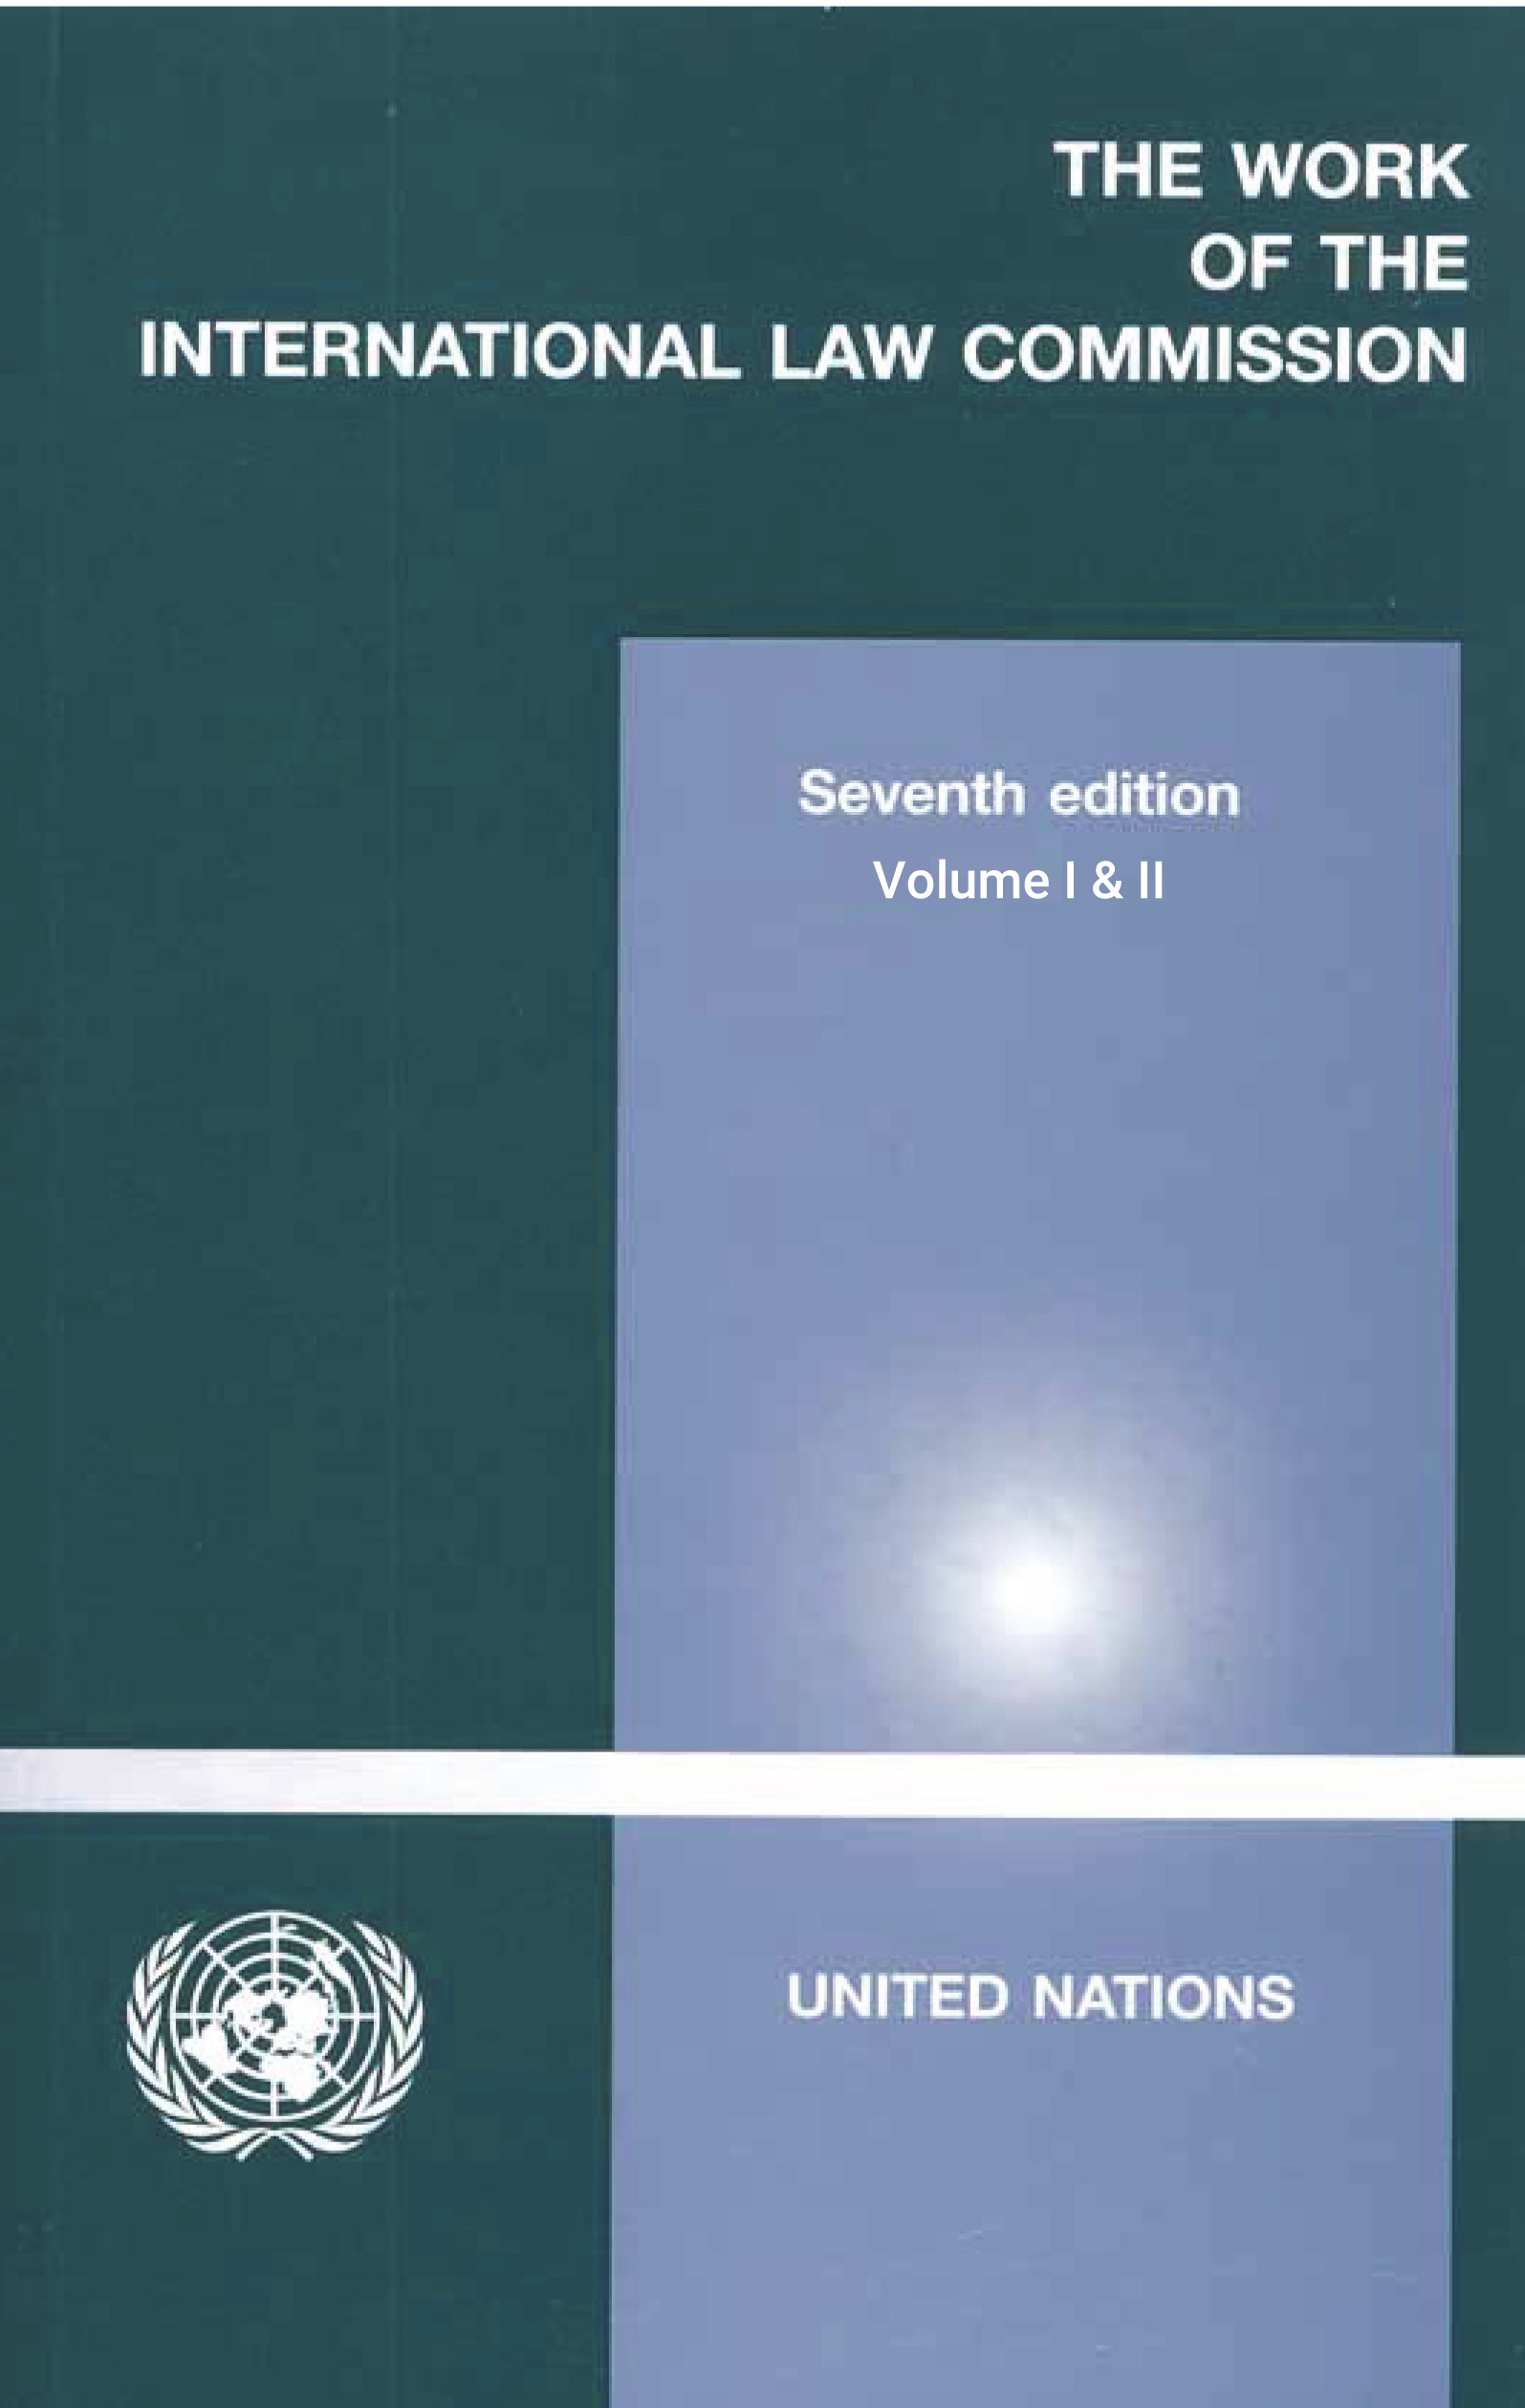 image of The Work of the International Law Commission: Seventh Edition